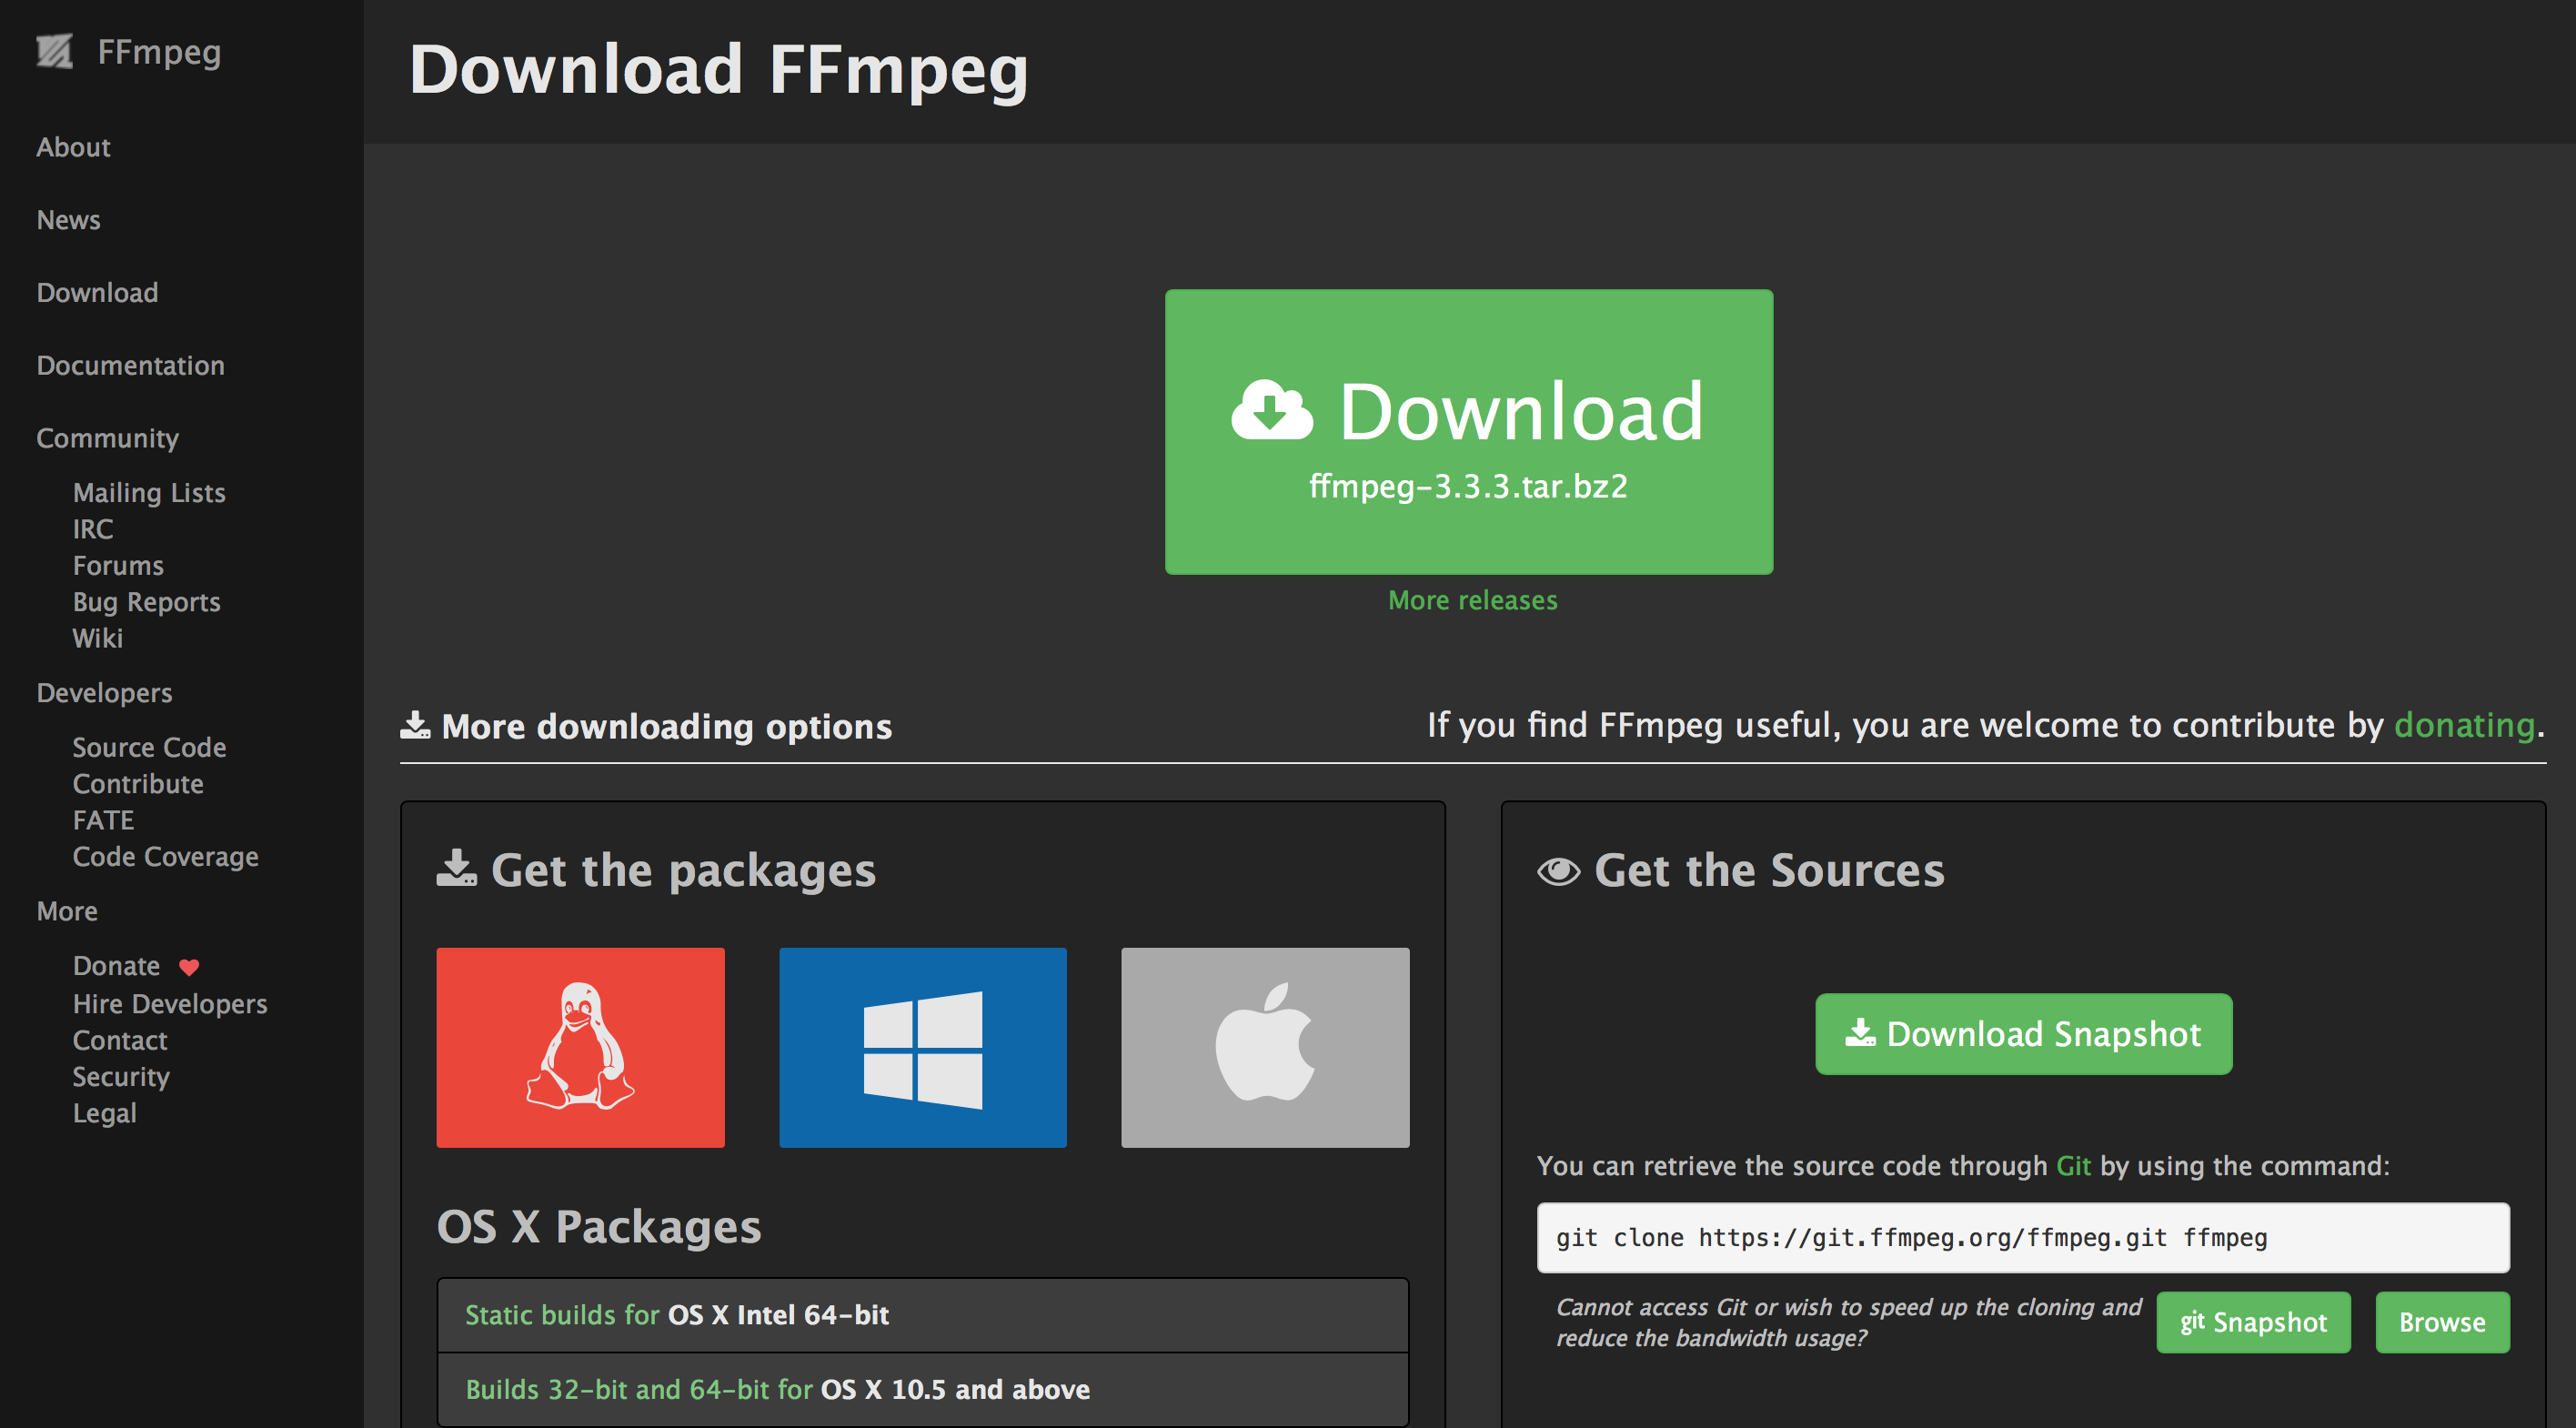 clever FFmpeg-GUI 3.1.3 download the new version for android